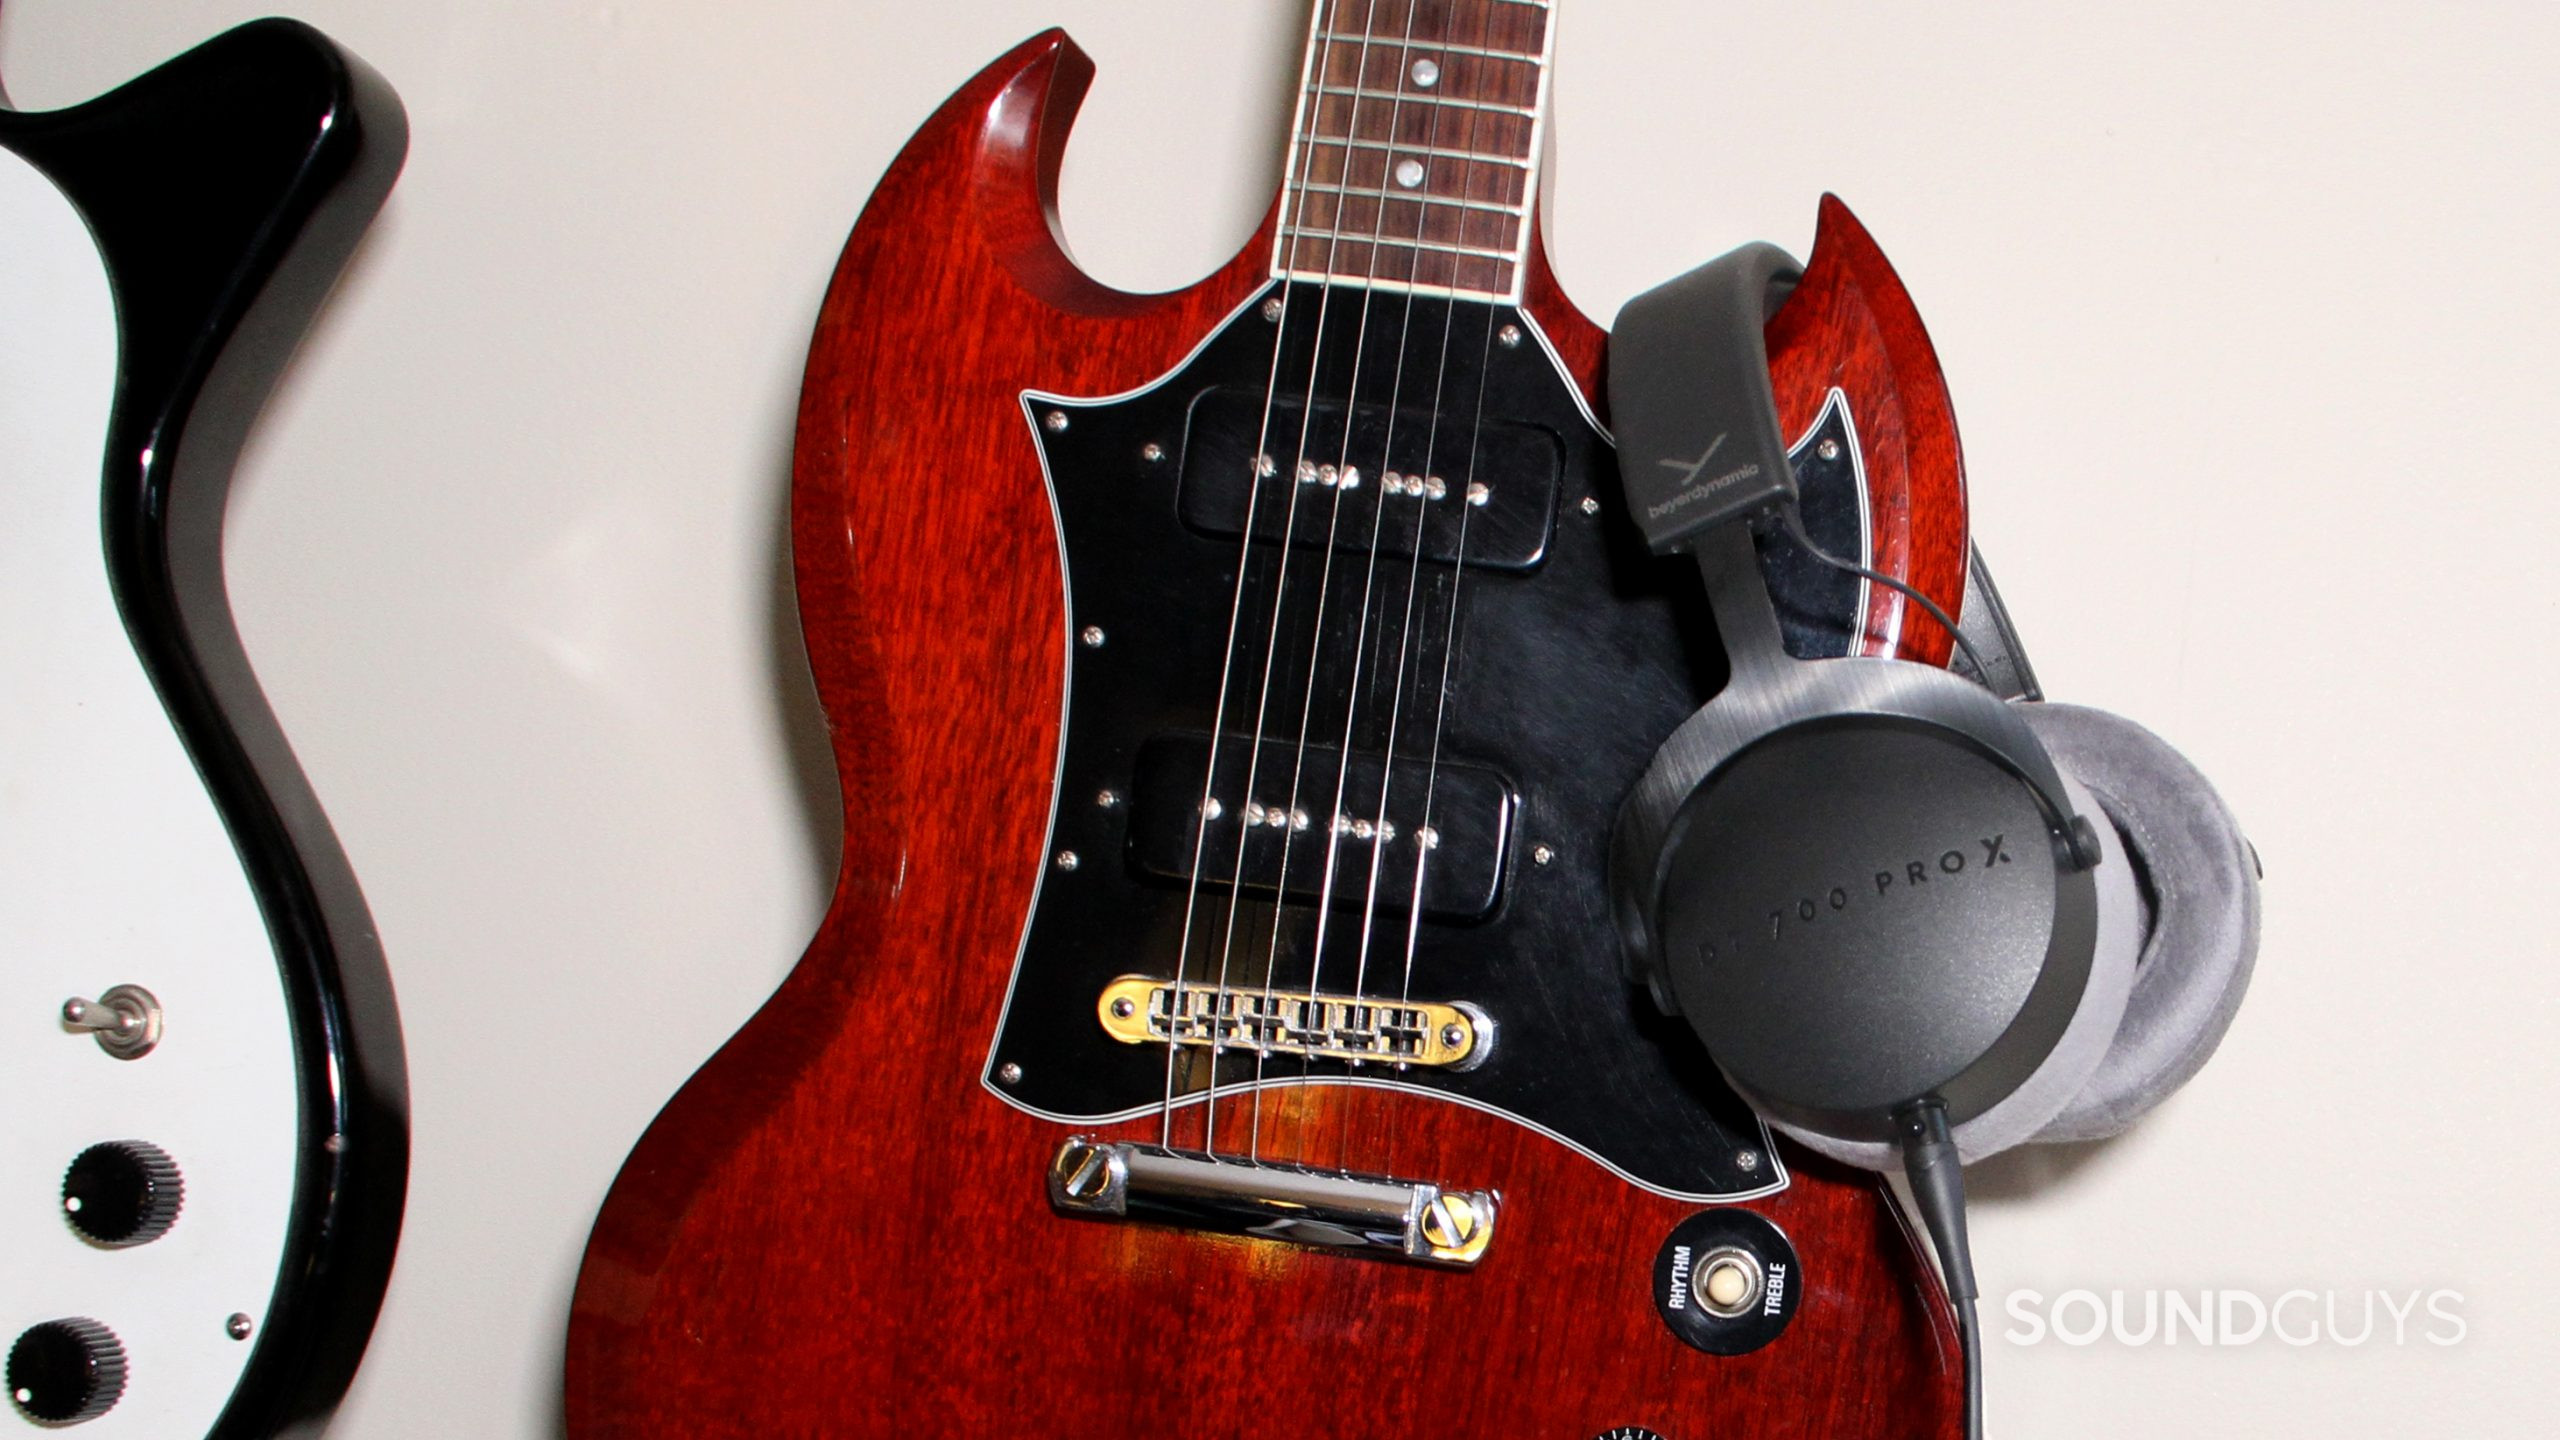 Beyerdynamic DT 700 Pro X slung over the horn of an electric guitar.